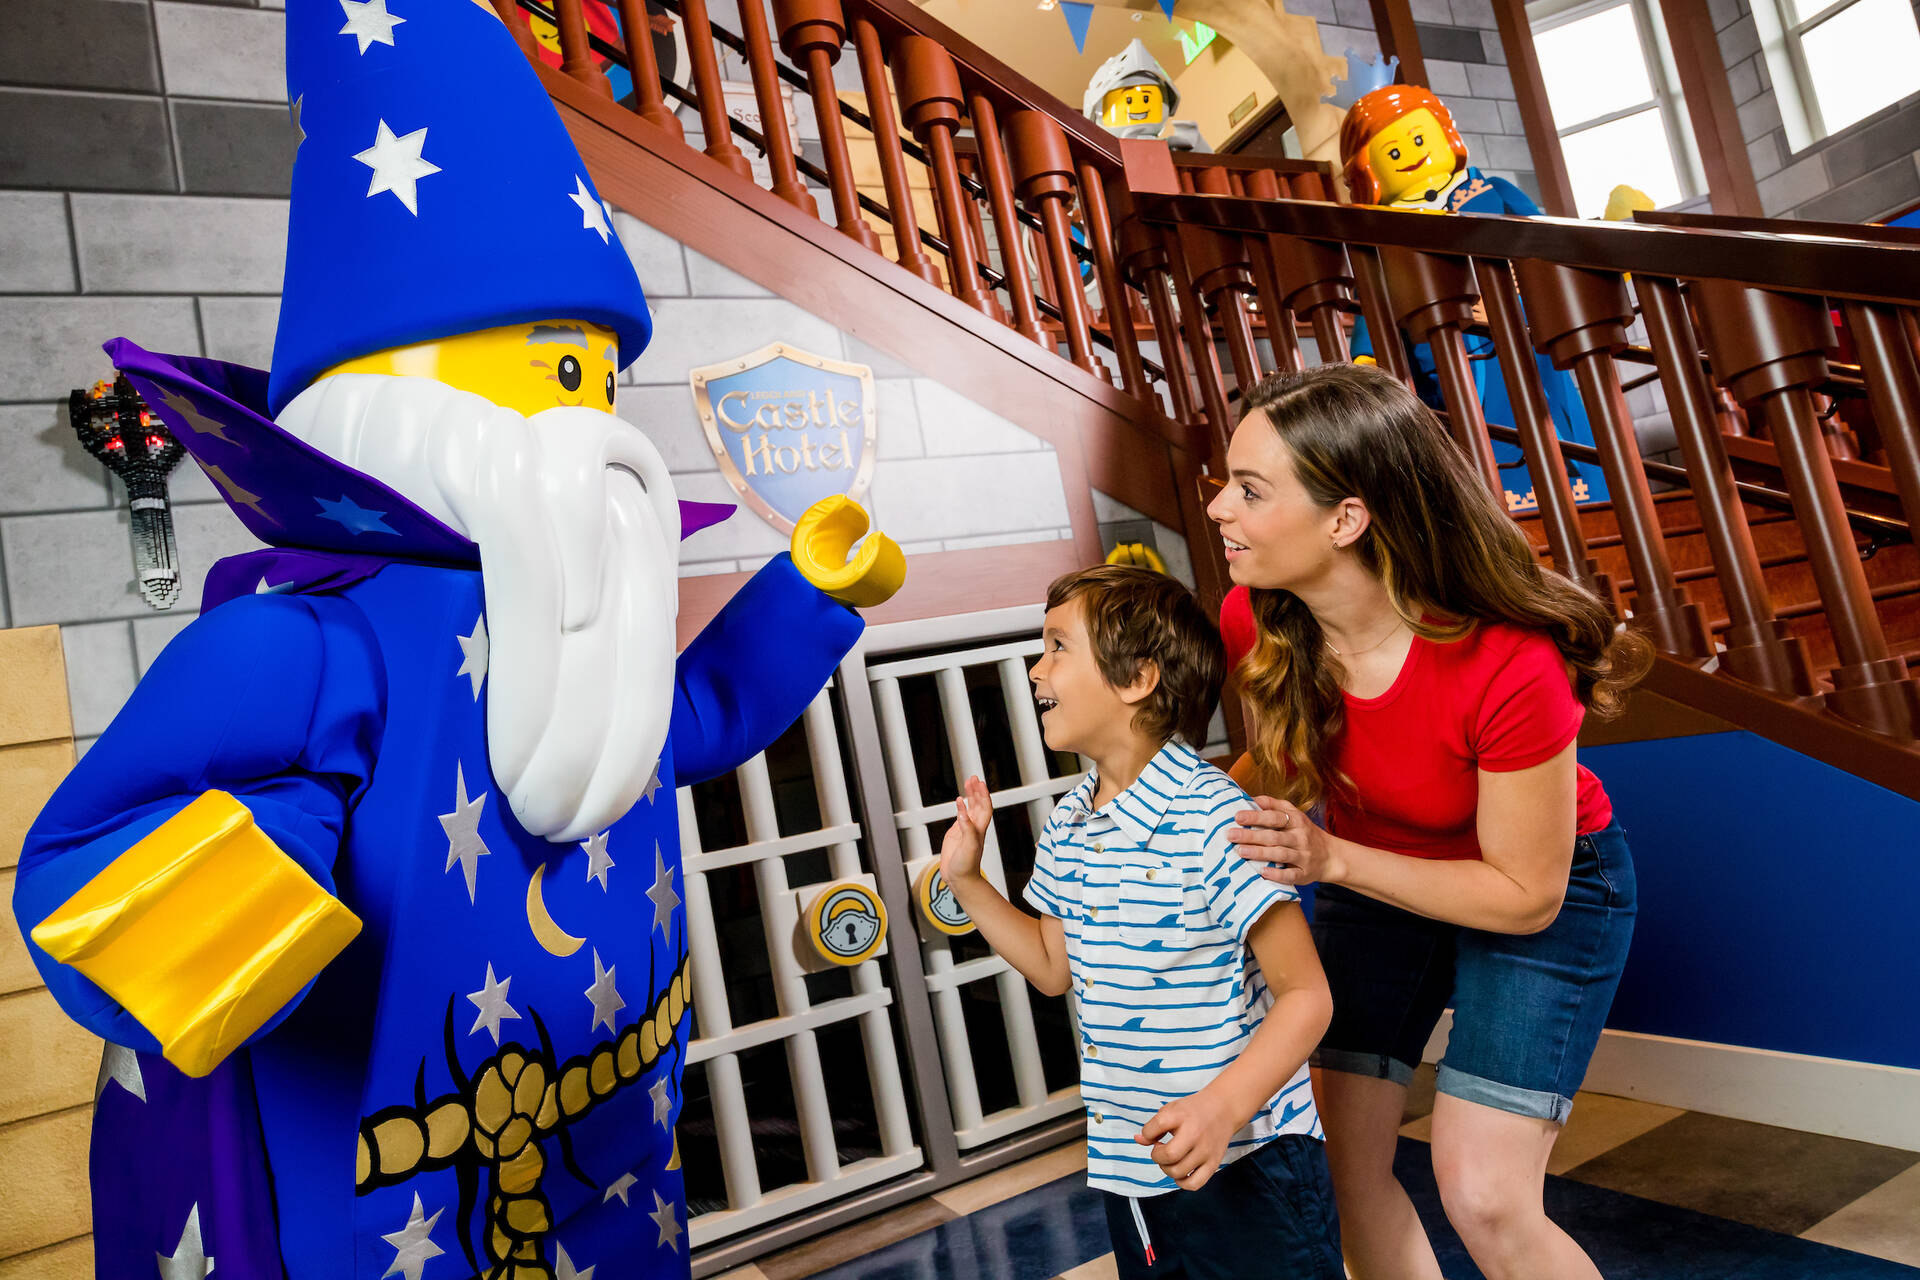 Mom and son meet Merlin the Wizard at the LEGOLAND Castle Hotel